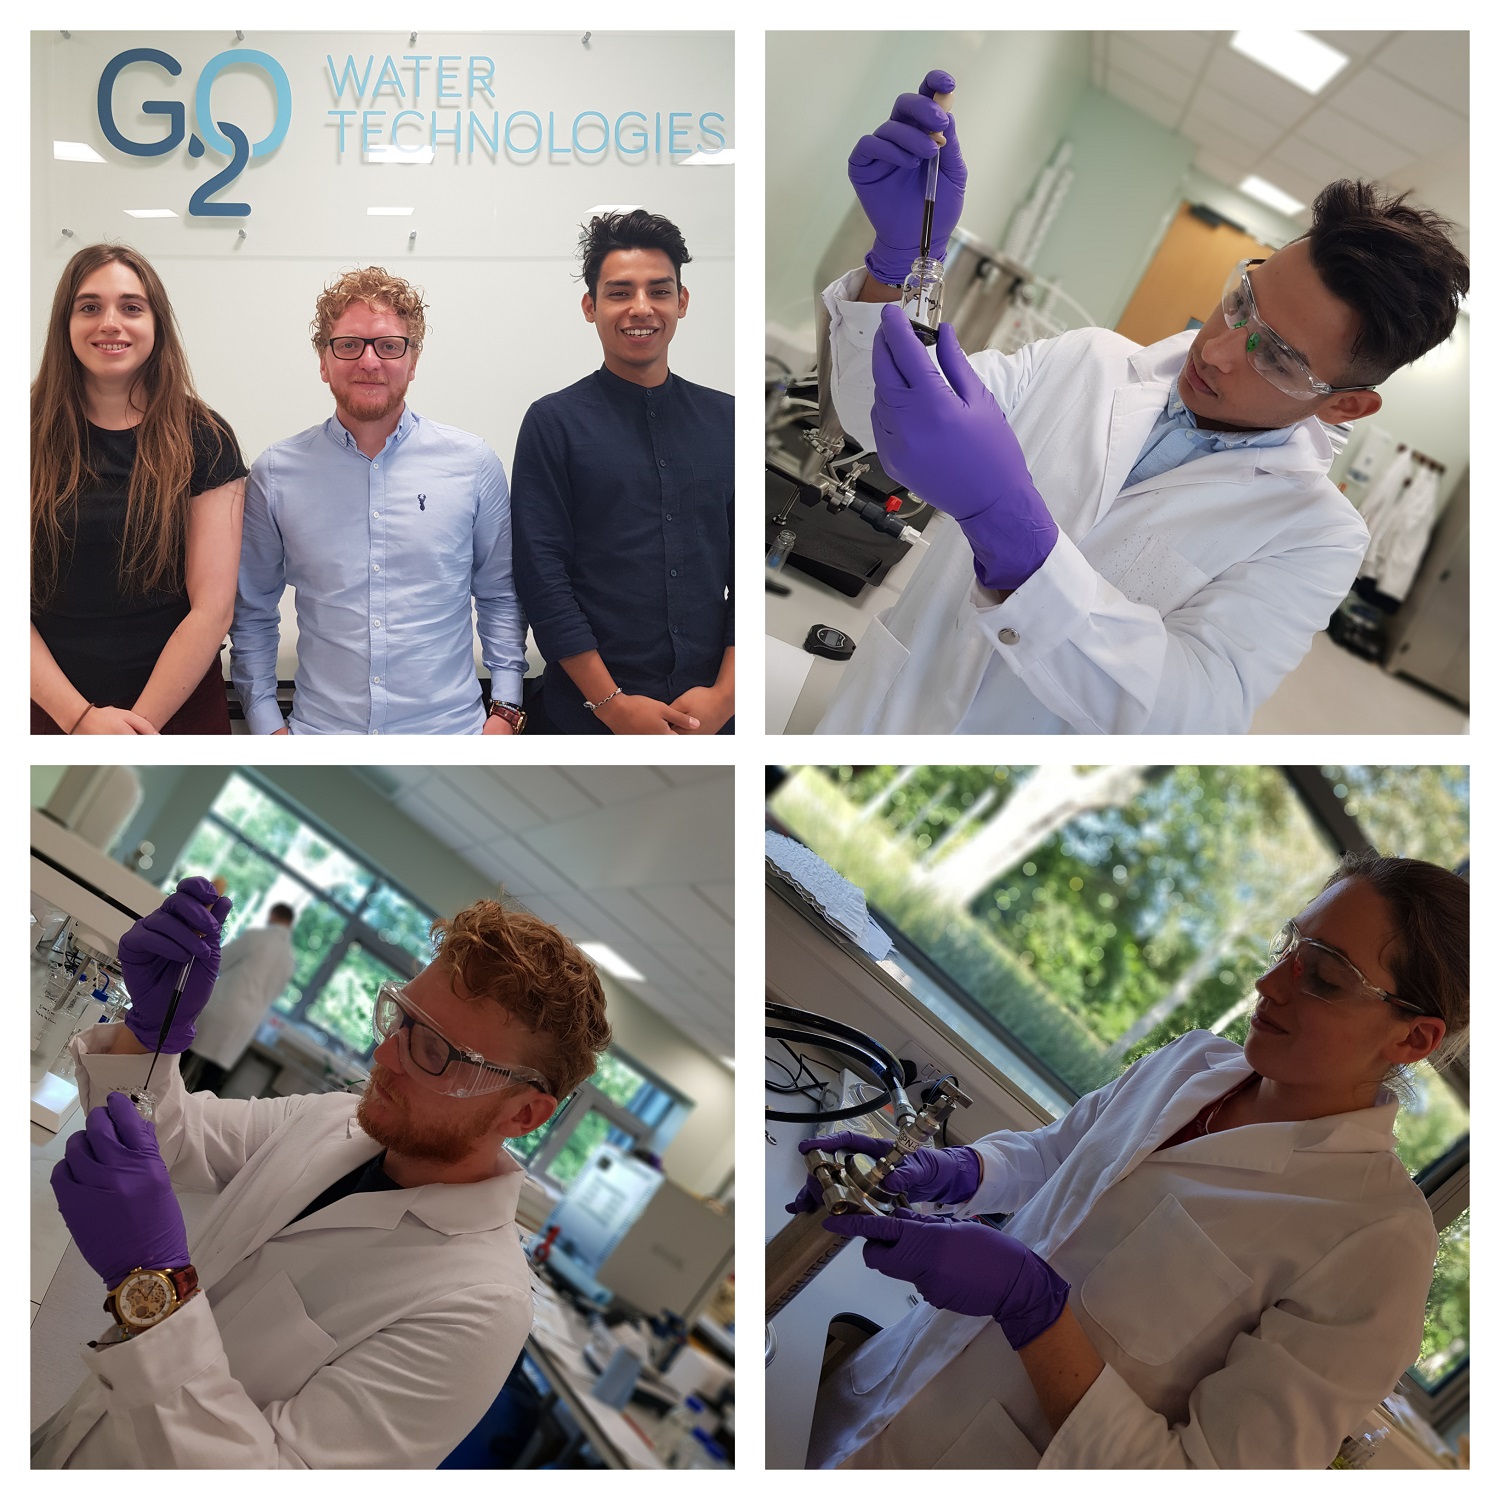 Teeside University students Helena Driffill-Agar, Mark Parker and Michael Cardoso at work in the G2O lab.